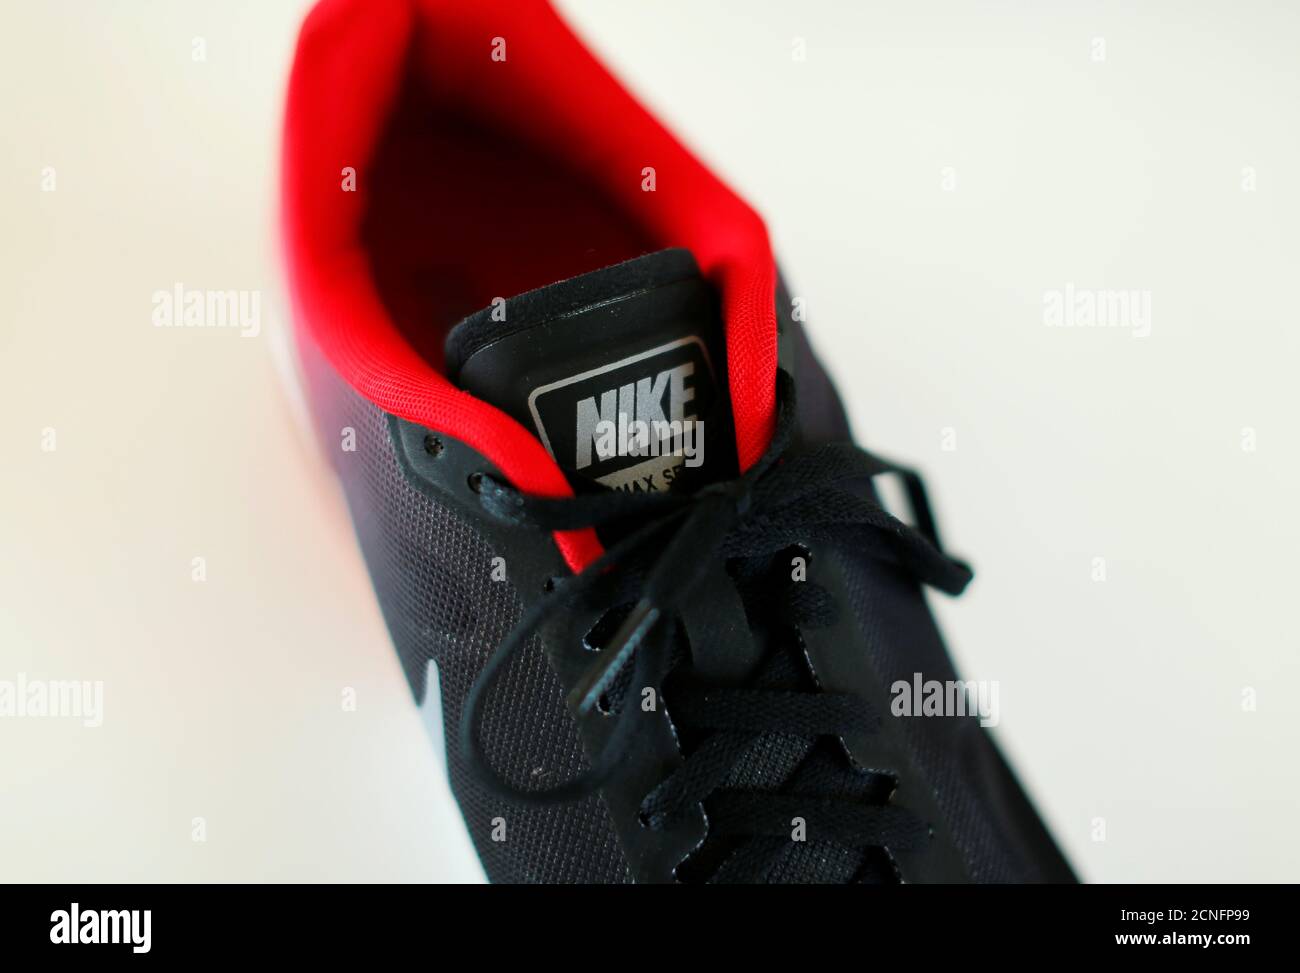 Nike Air Max High Resolution Stock Photography and Images - Alamy